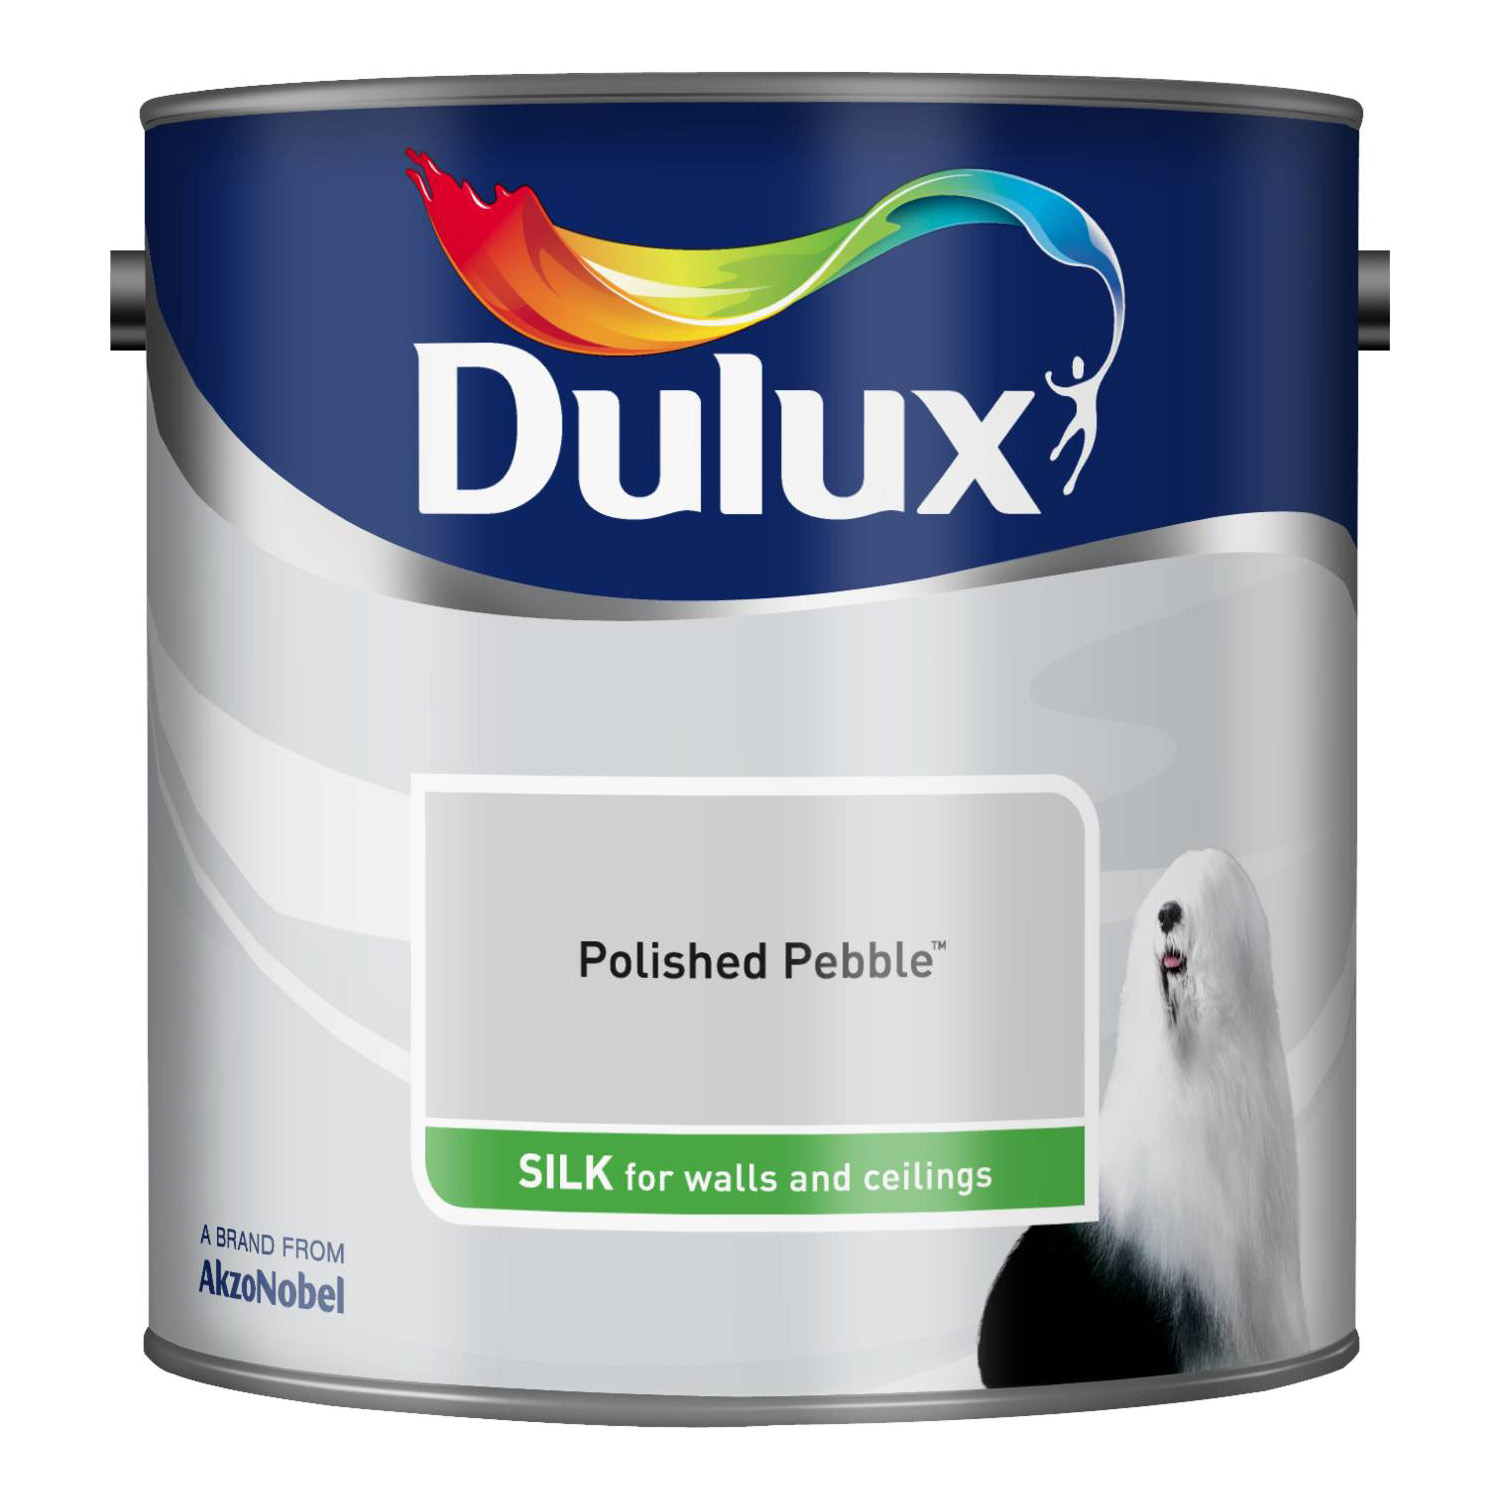 Dulux Cocktail Paint Mixing Pictures Wallpapers